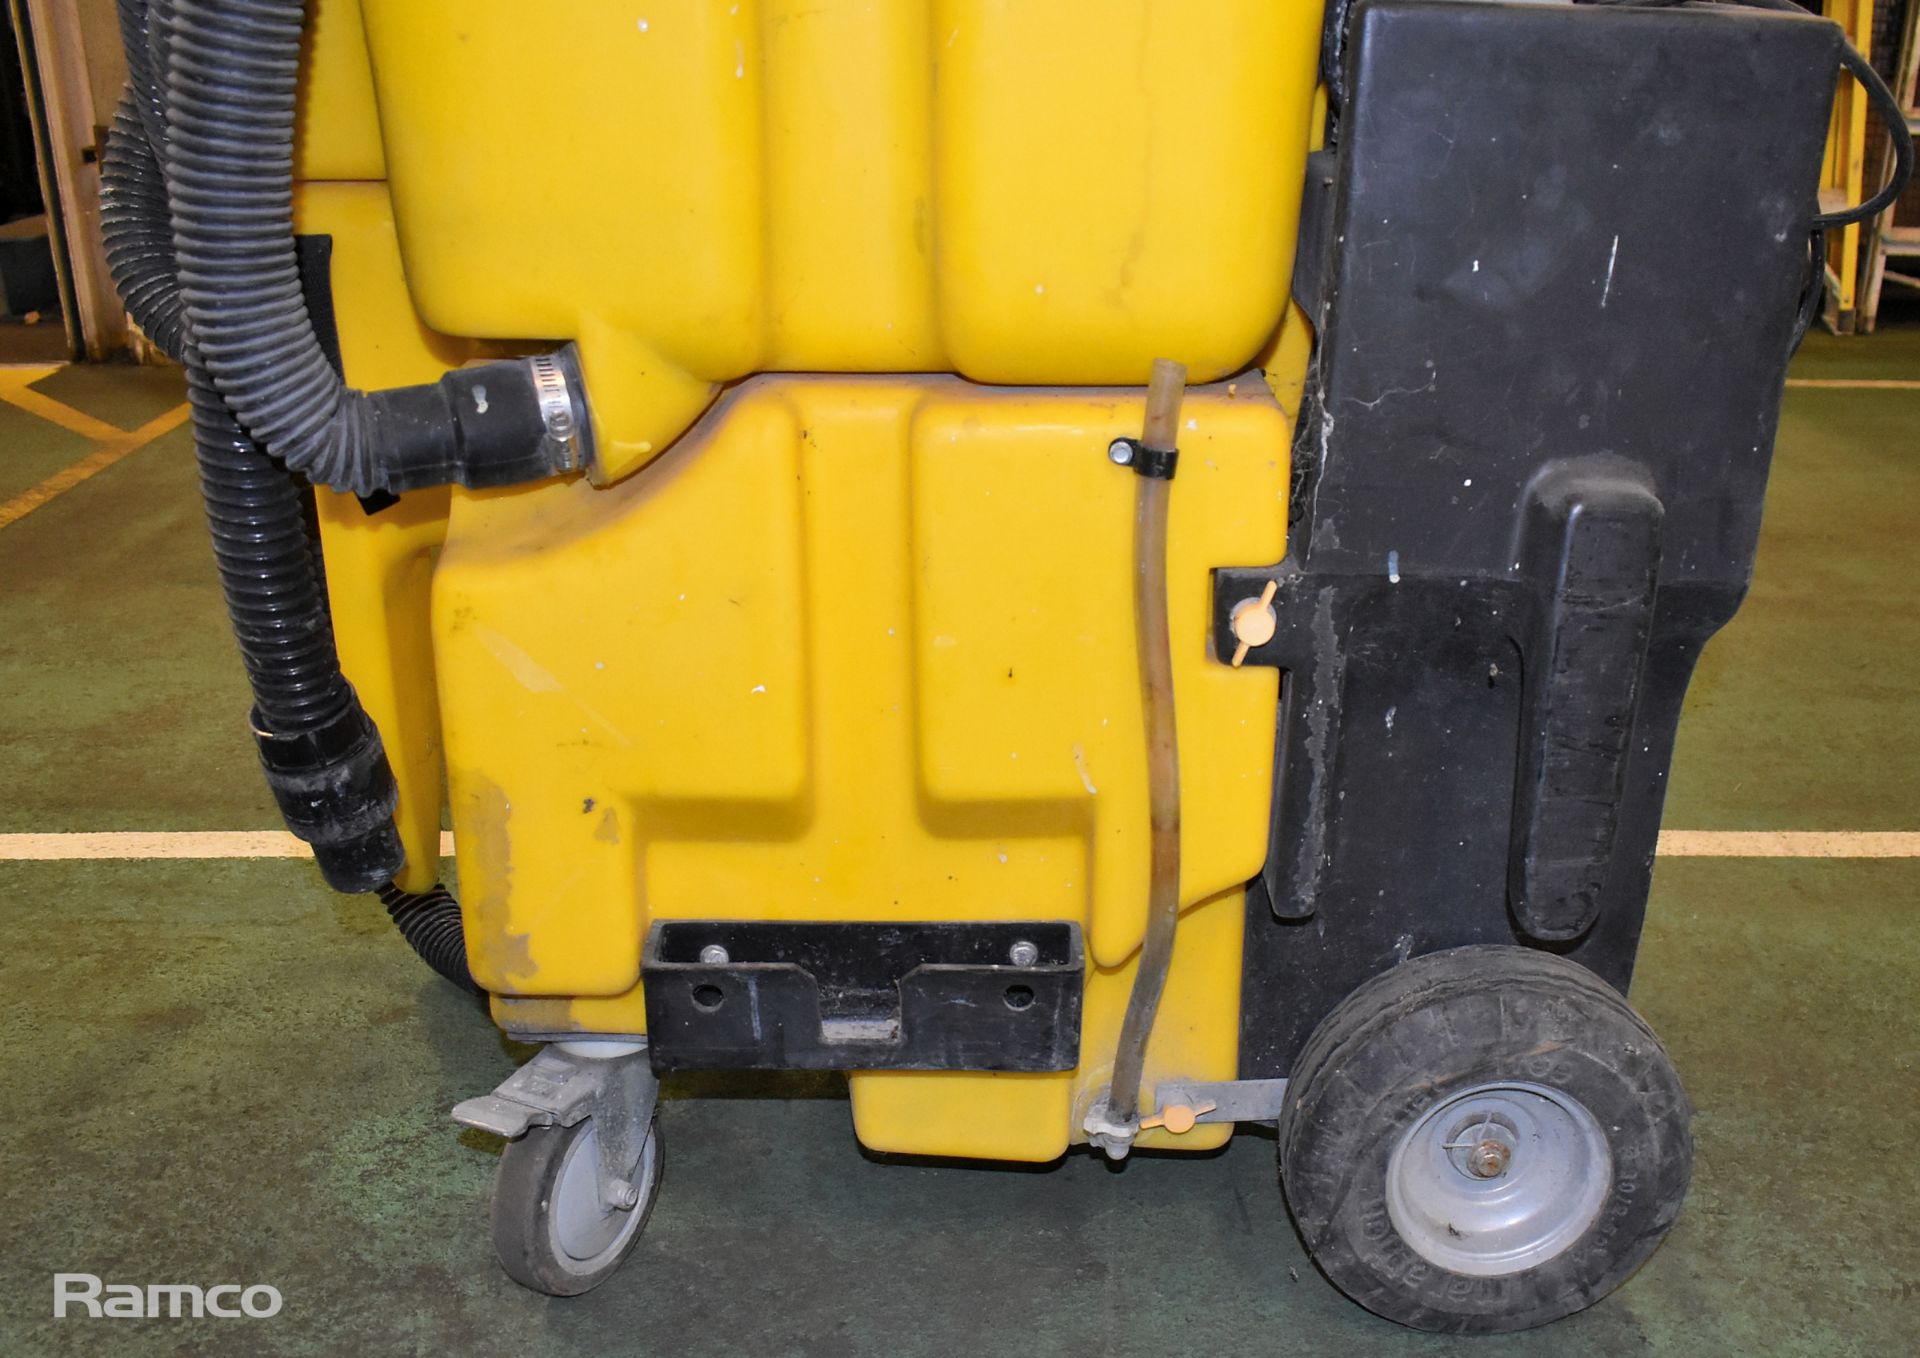 Kaivac Cleaning Systems industrial pressure washer - 240V - Image 5 of 7